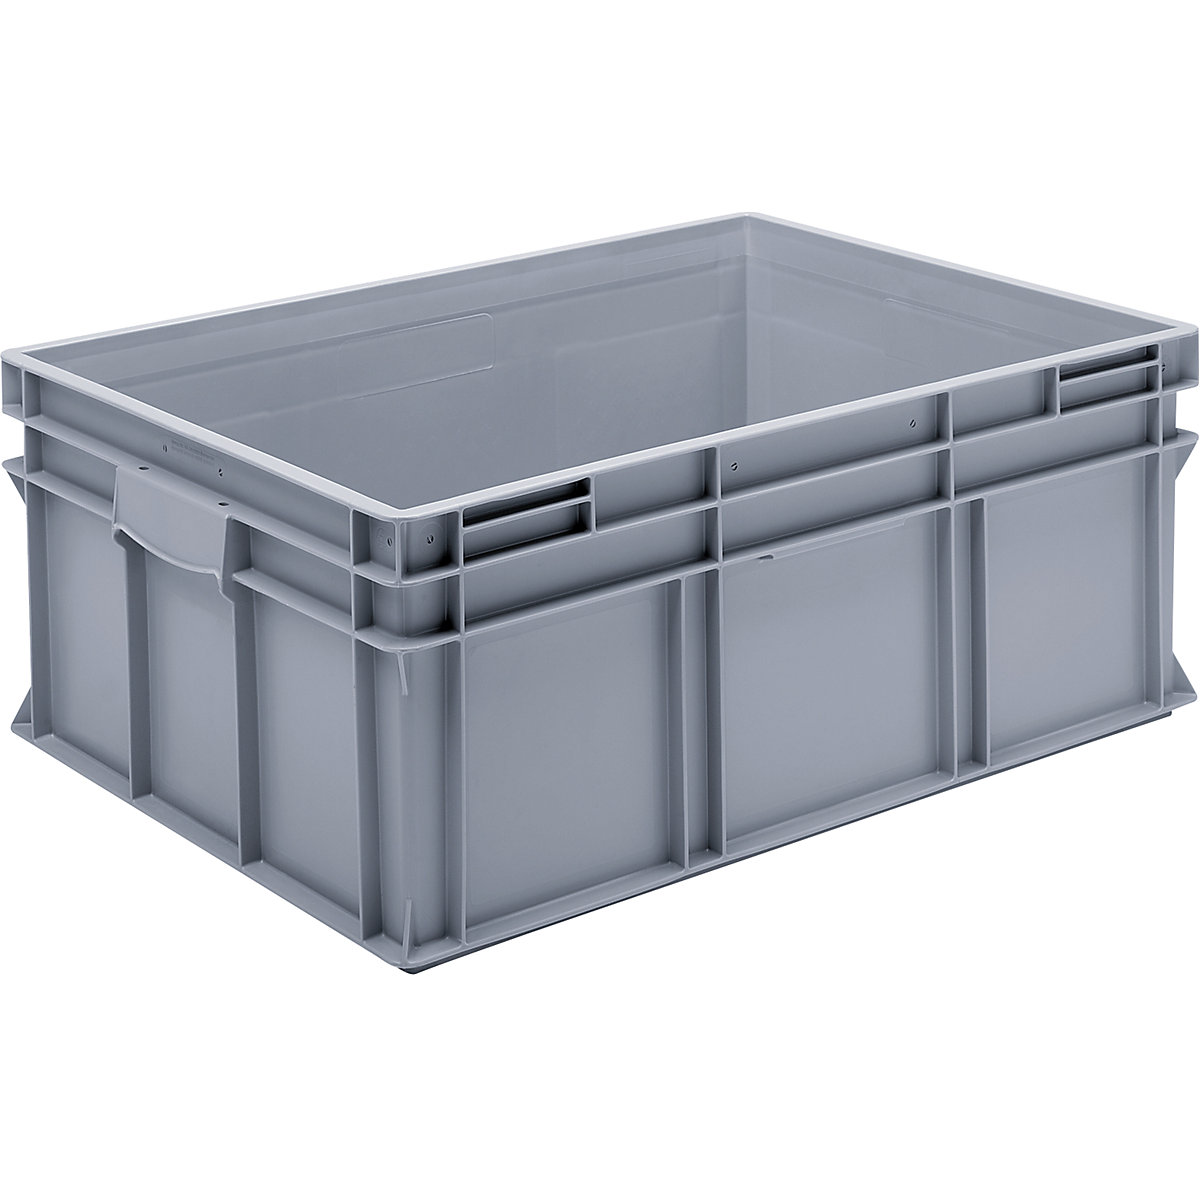 Euro stacking container made of polypropylene (PP), max. load 20 kg, silver grey, capacity 122 l, external height 300 mm, pack of 1